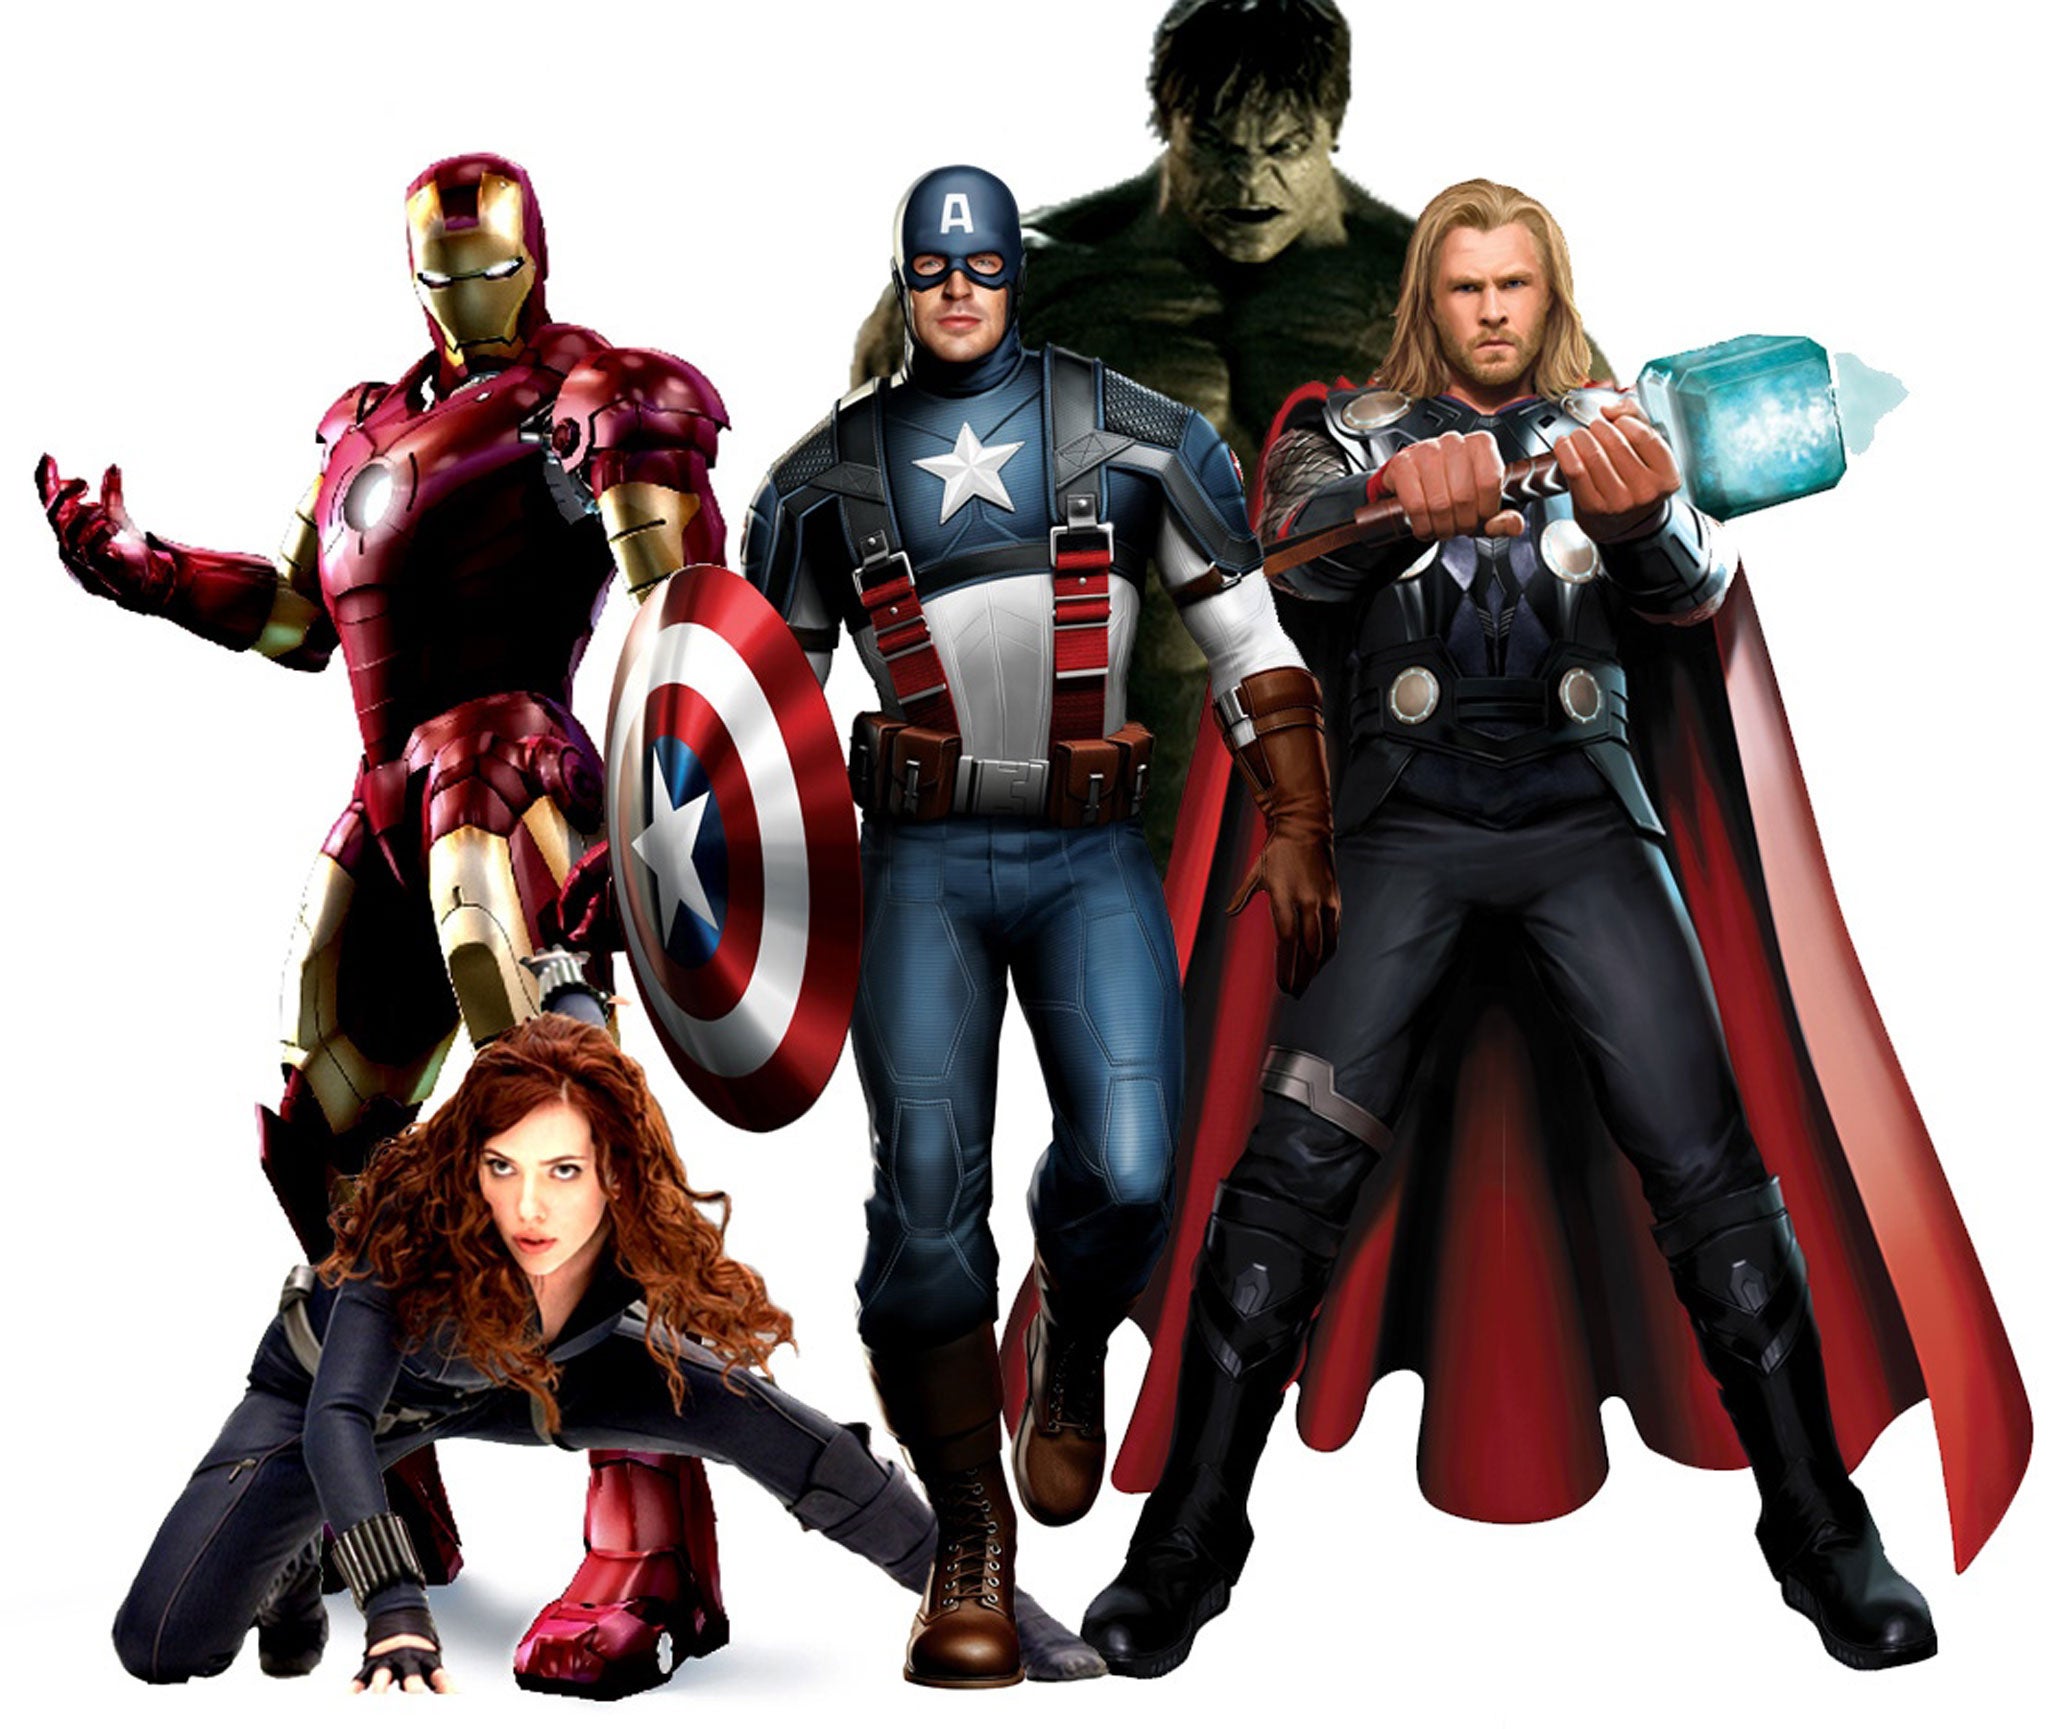 Avengers Assemble smashed box-office records and its 2015 sequel will do the same